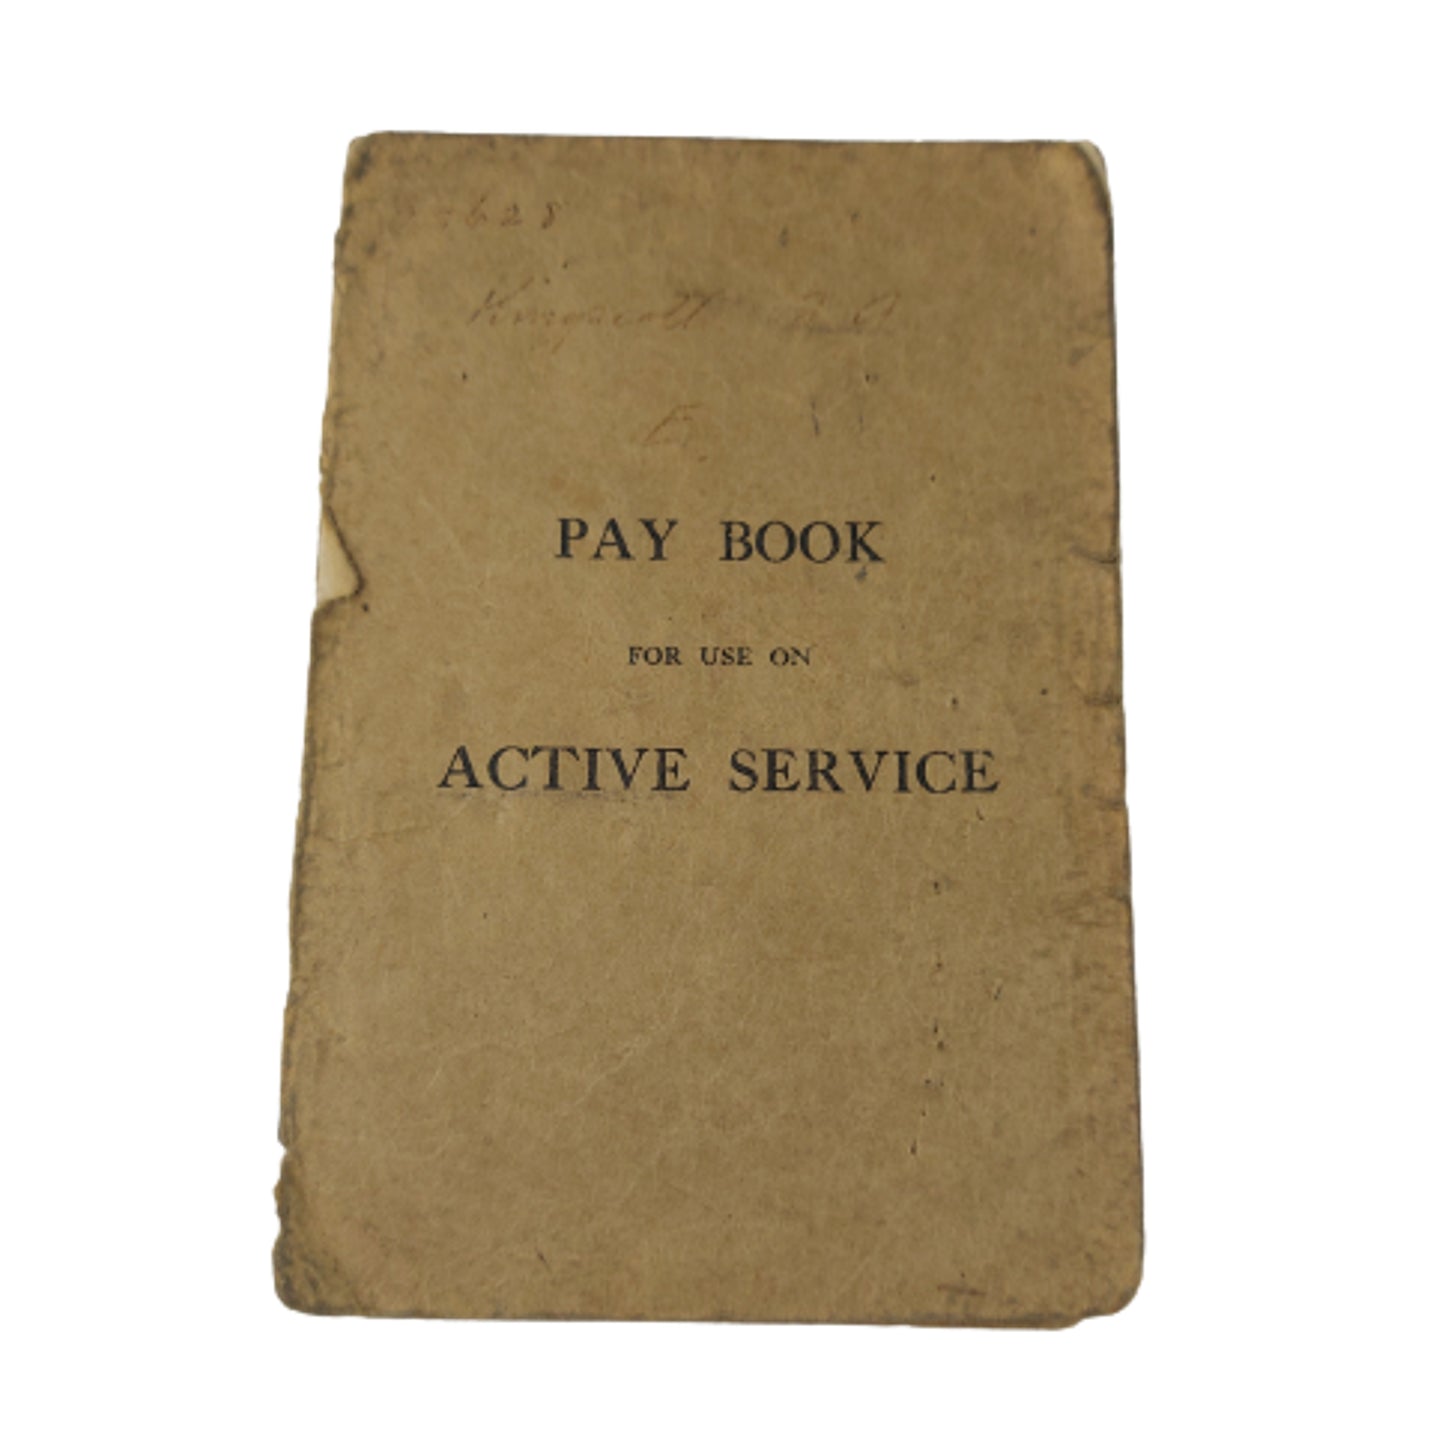 WW1 Canadian Pay Book For Active Service 15th Battalion 48th Highlanders